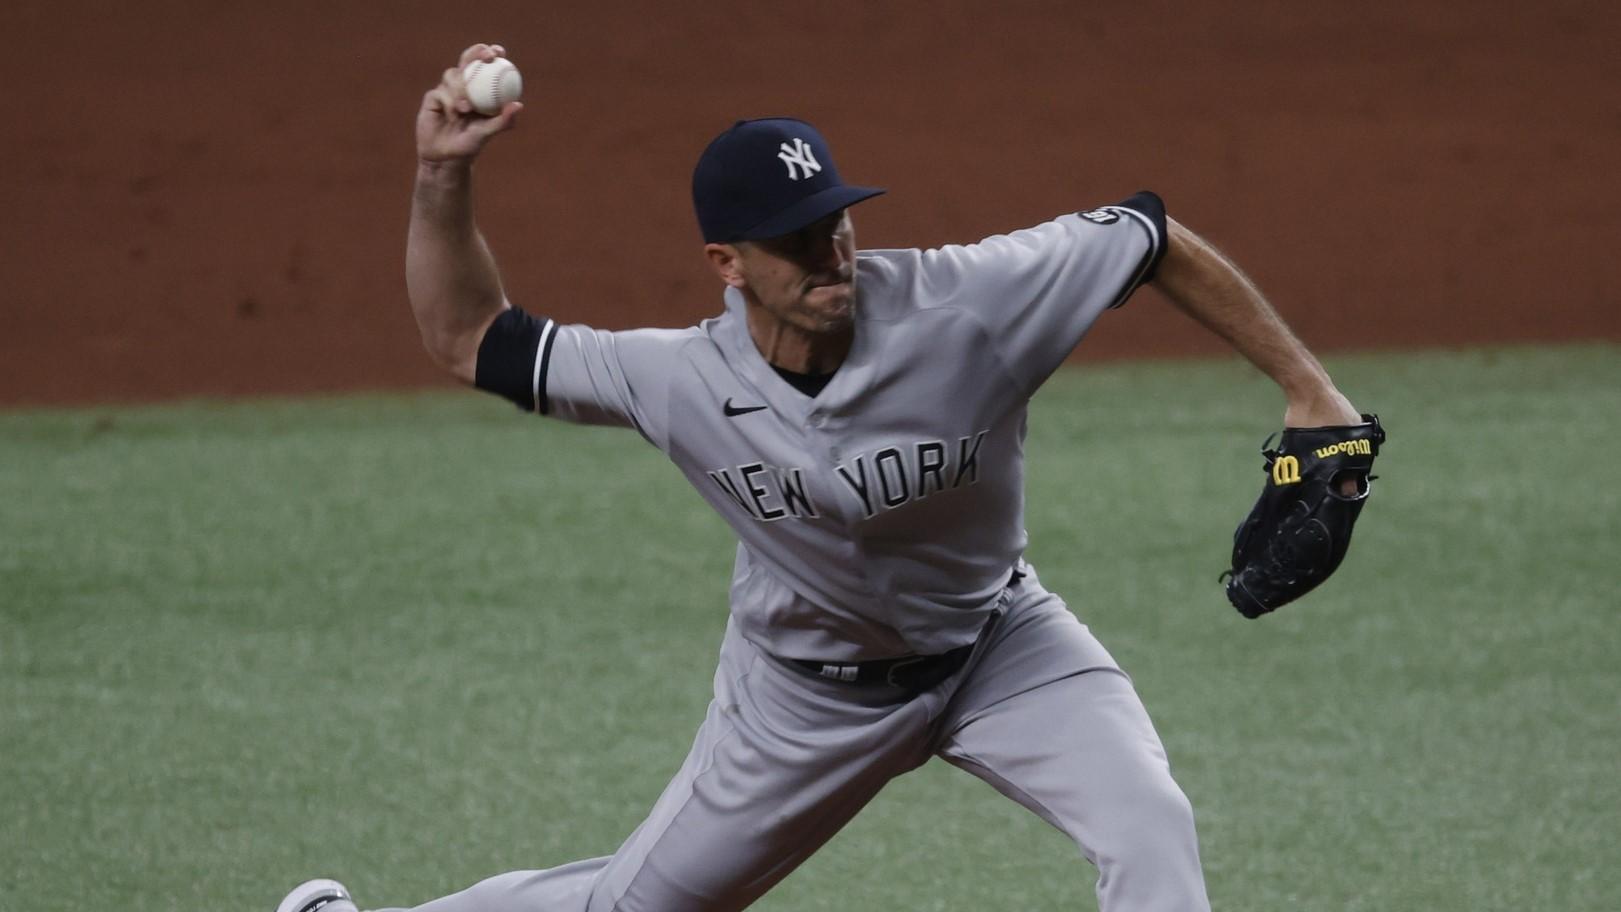 Apr 11, 2021; St. Petersburg, Florida, USA; New York Yankees relief pitcher Darren O'Day (56) throws a pitch during the eighth inning against the Tampa Bay Rays at Tropicana Field. / Kim Klement-USA TODAY Sports